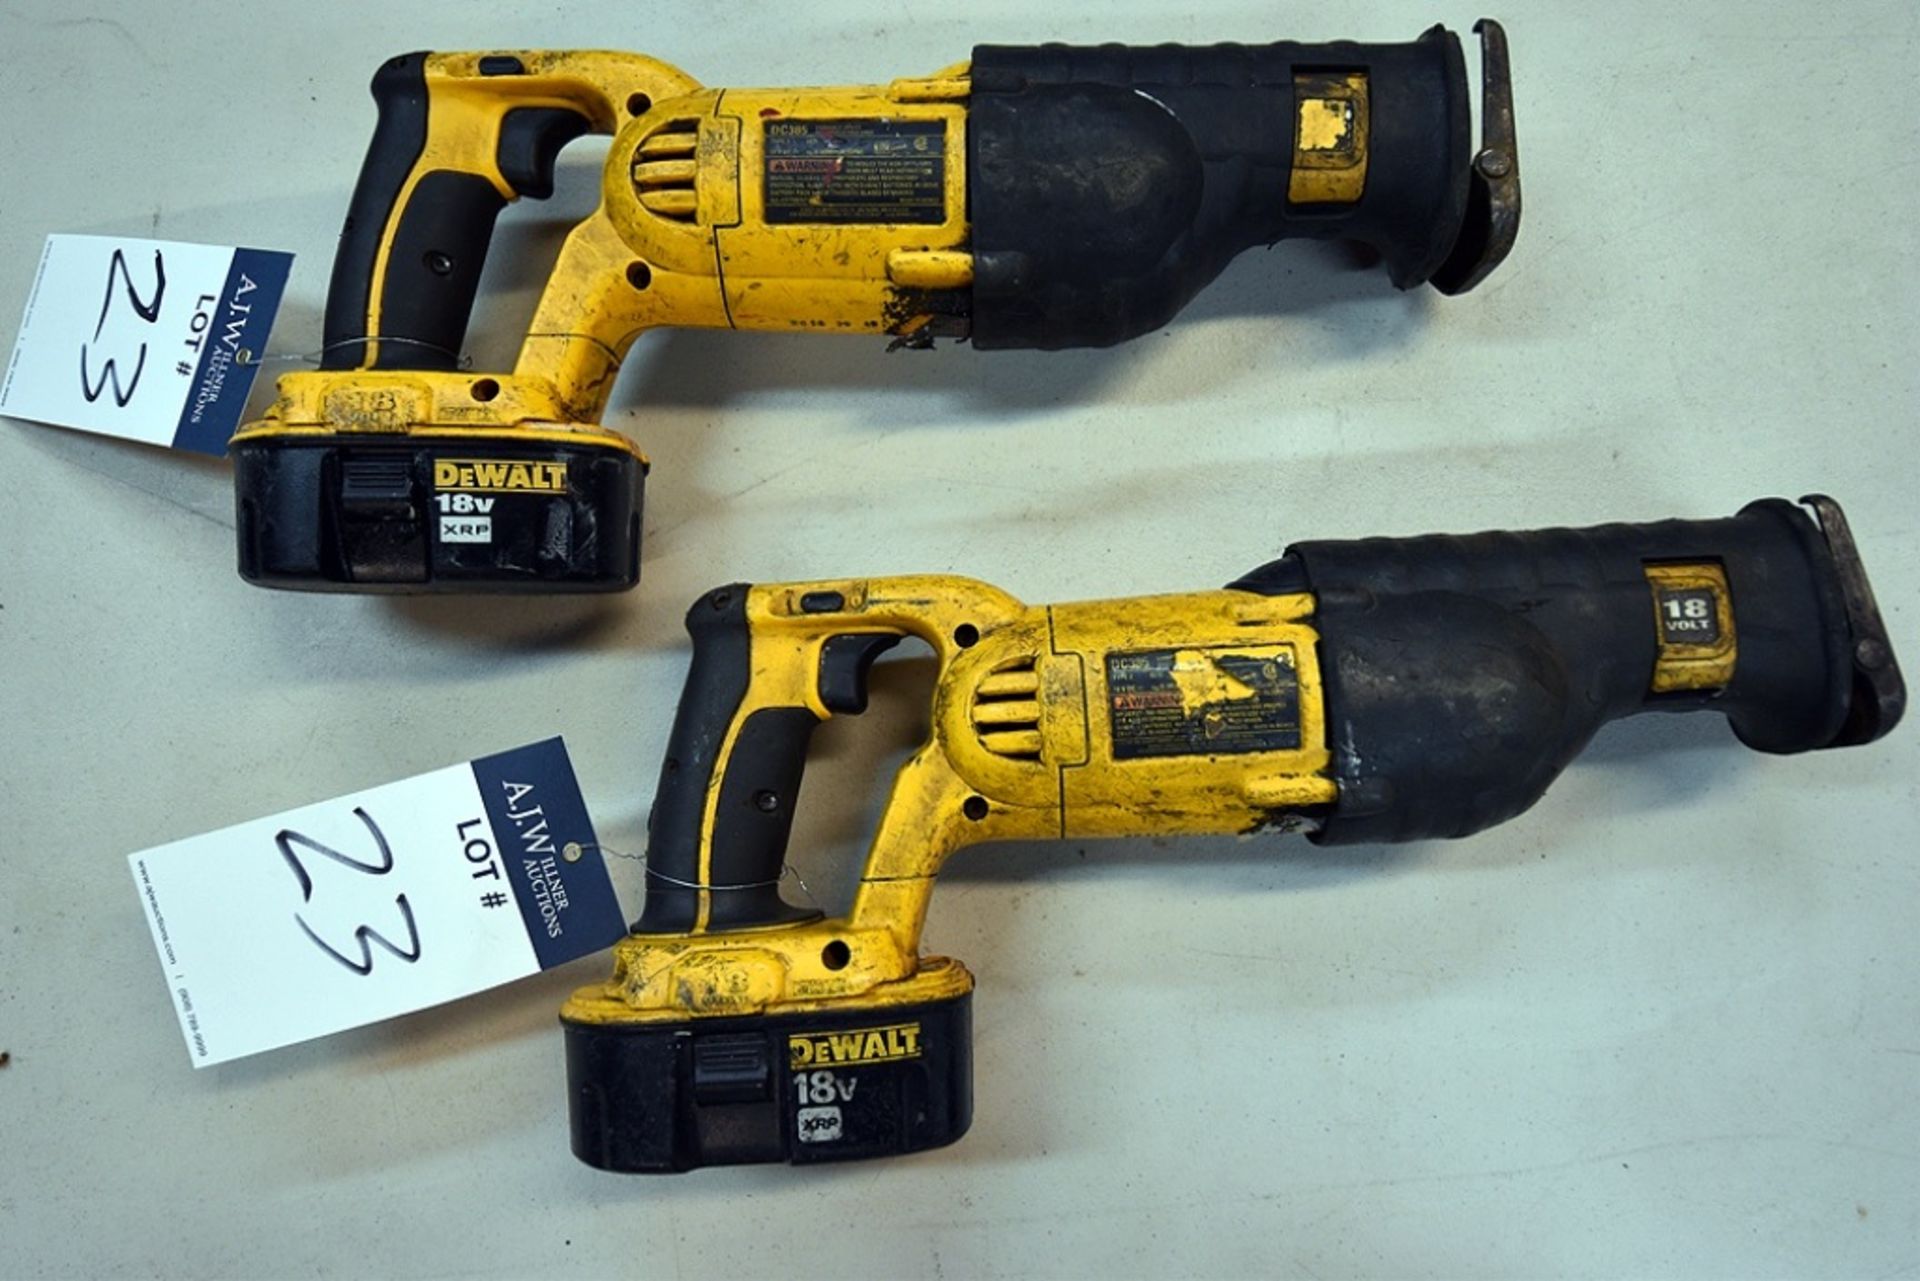 DeWalt DC385 Variable Speed Reciprocating Saws 18v w/ (4) Batteries and (2) Chargers - Image 2 of 5